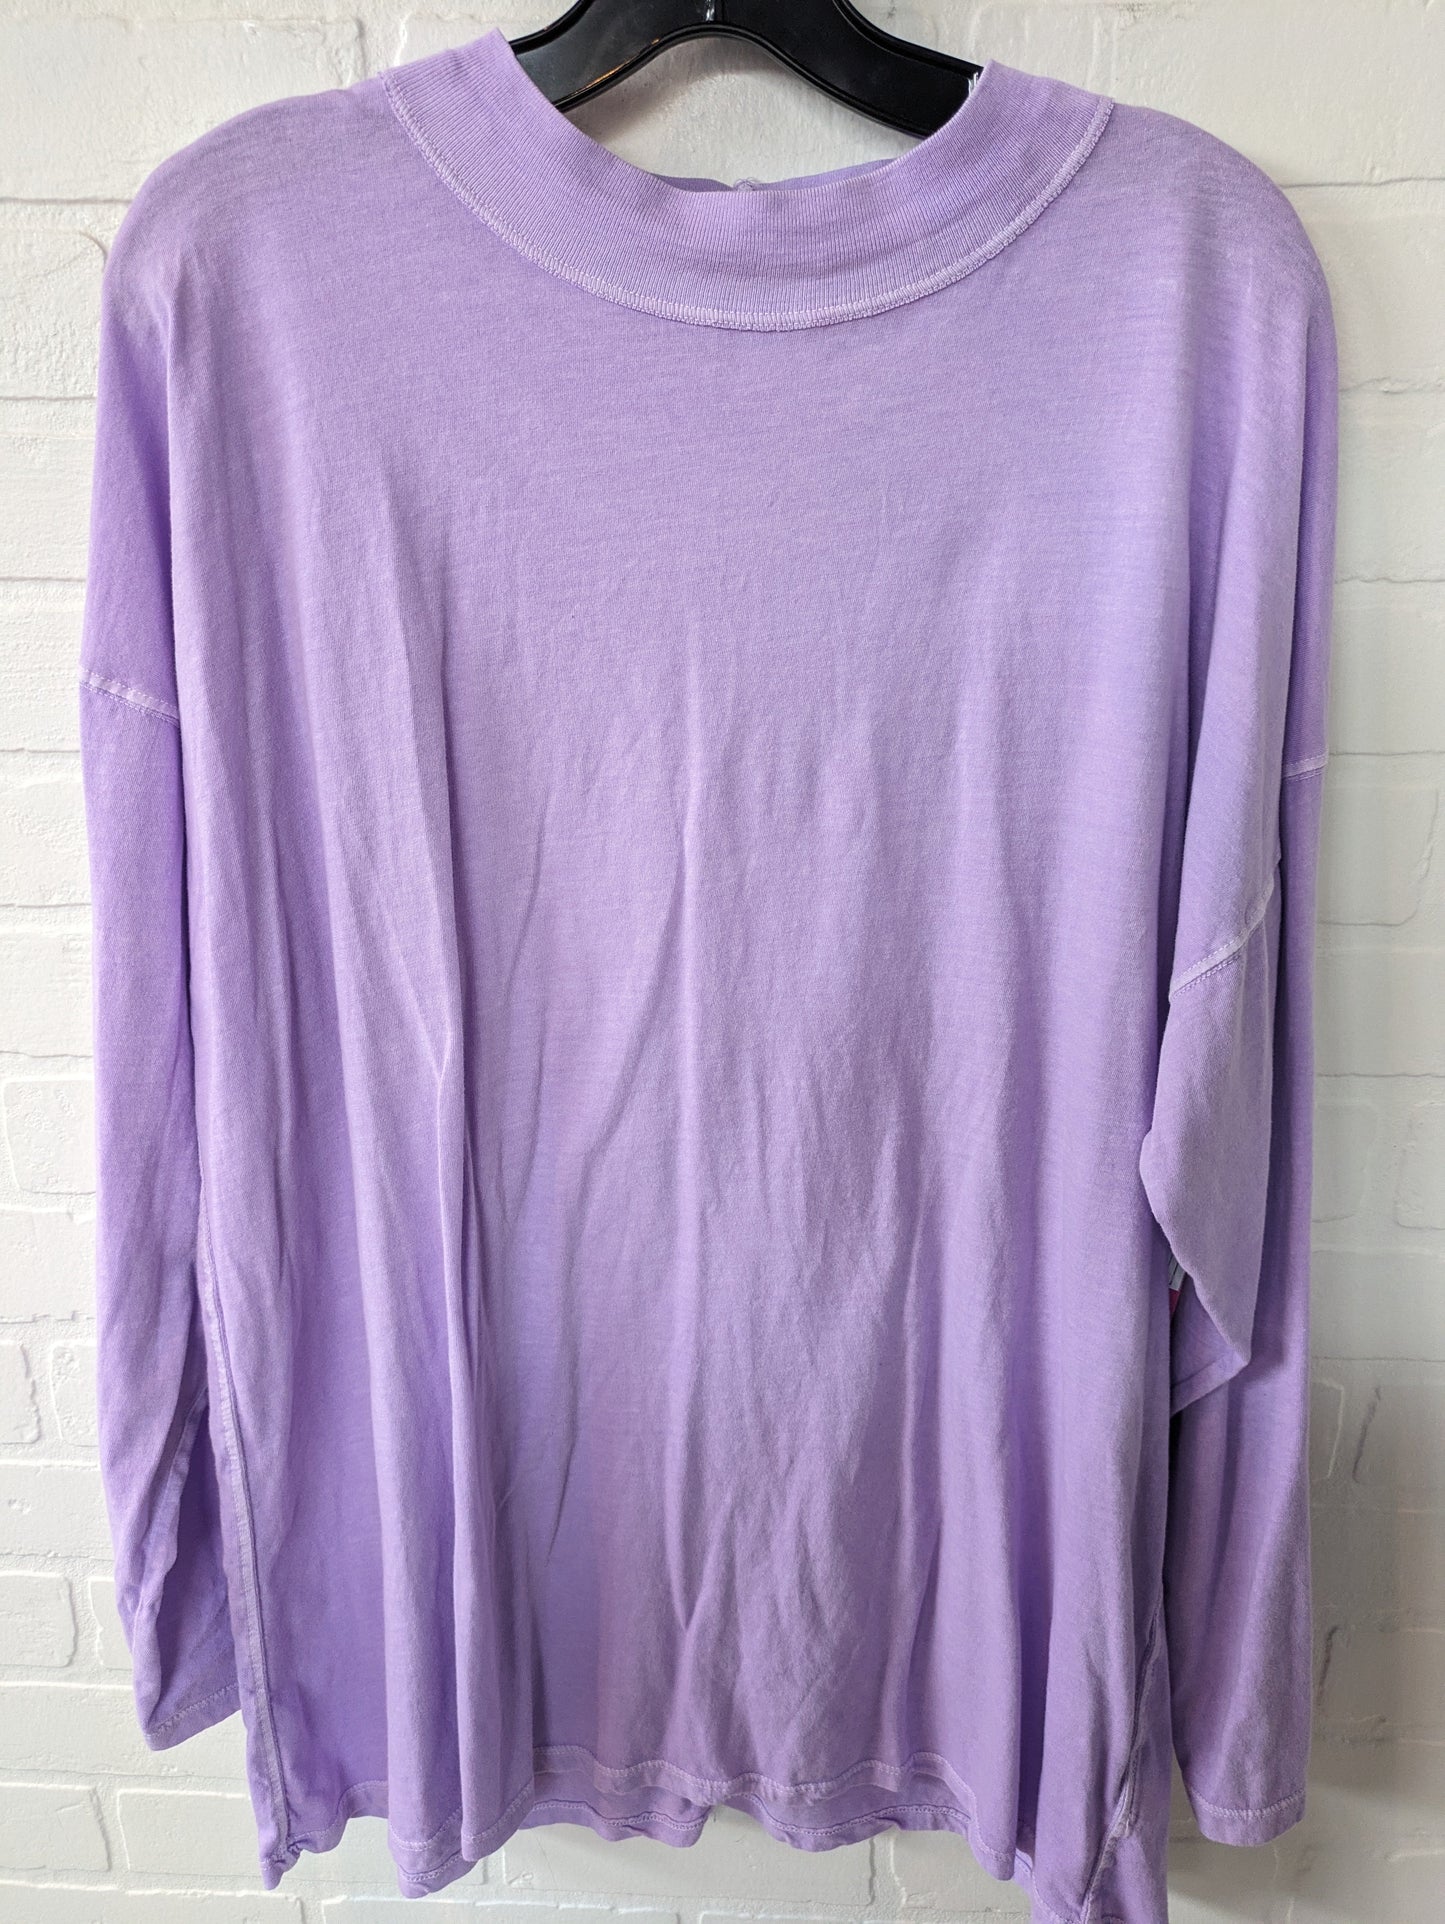 Top Long Sleeve Basic By We The Free  Size: L